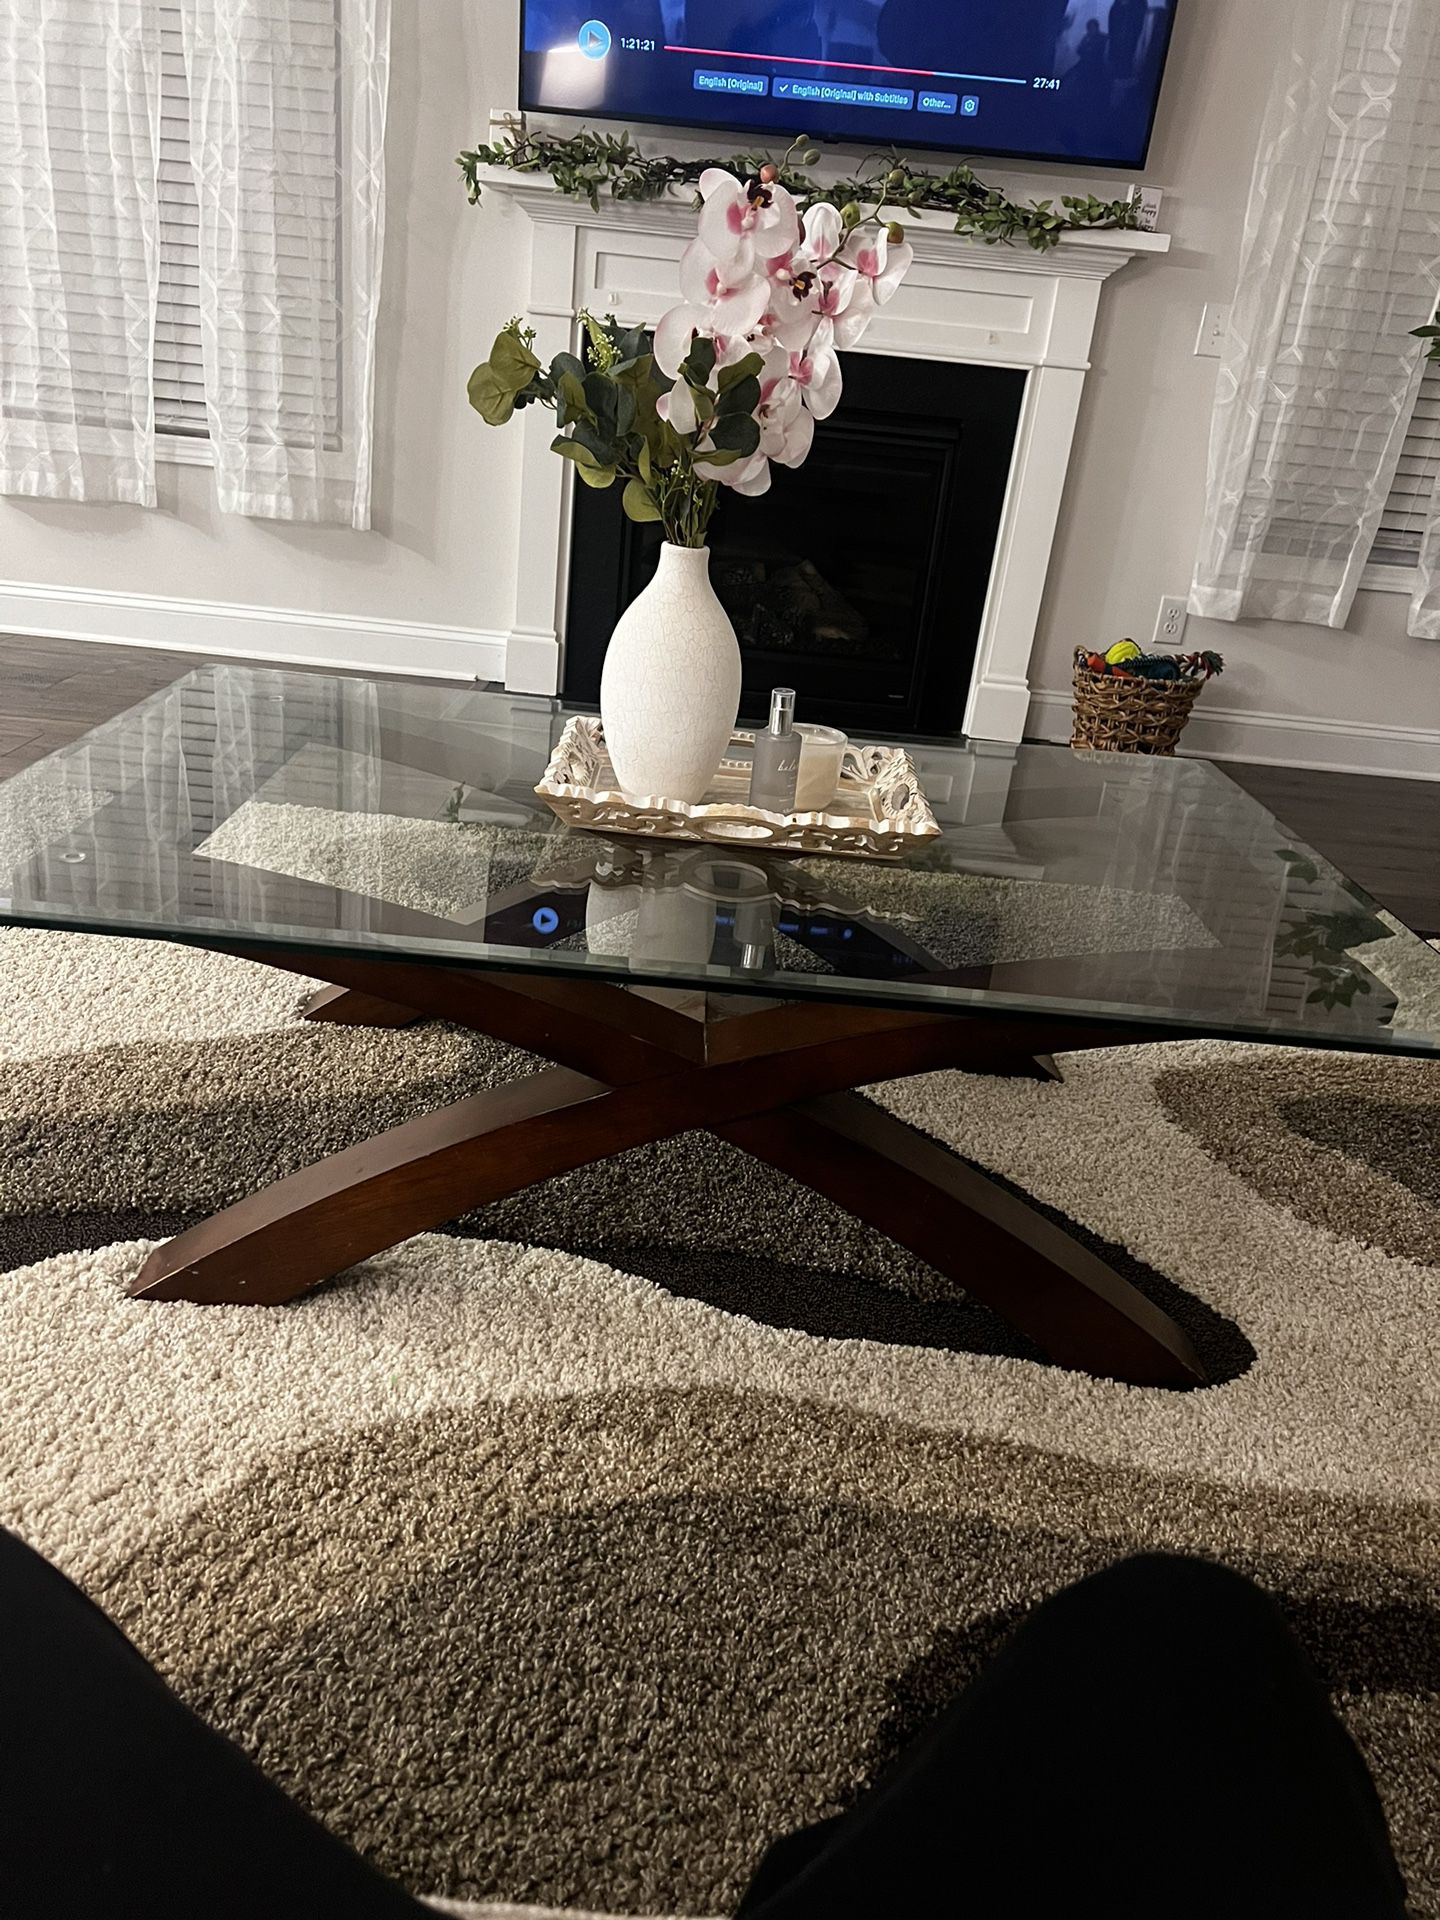 Center and end Tables 